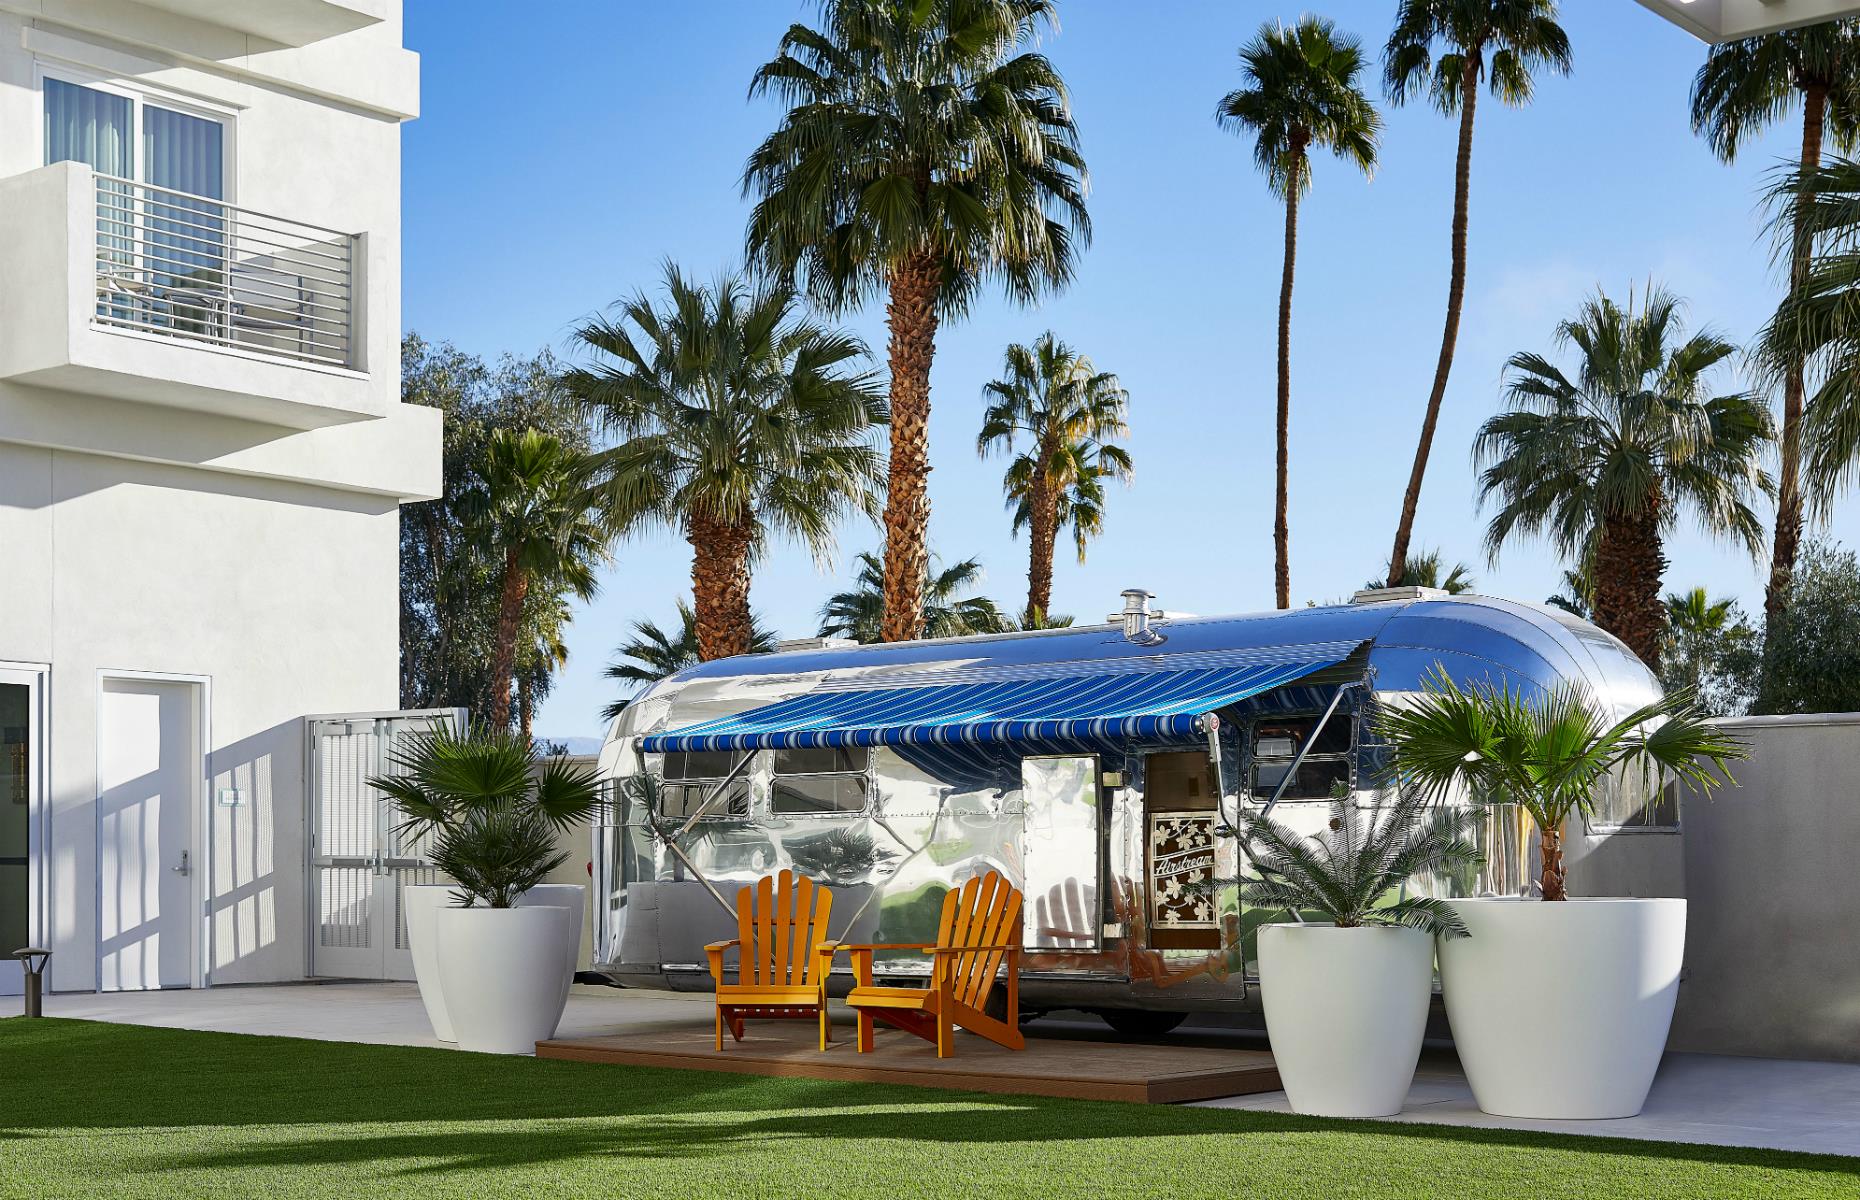 <p>Hotel Paseo, set in the heart of Palm Desert, Greater Palm Springs, is an oasis of cool. Whether you choose to relax by the pool, attend yoga classes or play golf, one thing’s for sure – the hotel’s restored 1950s Airstream trailer is the place to rest your head. It features a queen-sized bed, stainless steel kitchenette, shower and personal patio. It's guaranteed to turn heads.</p>